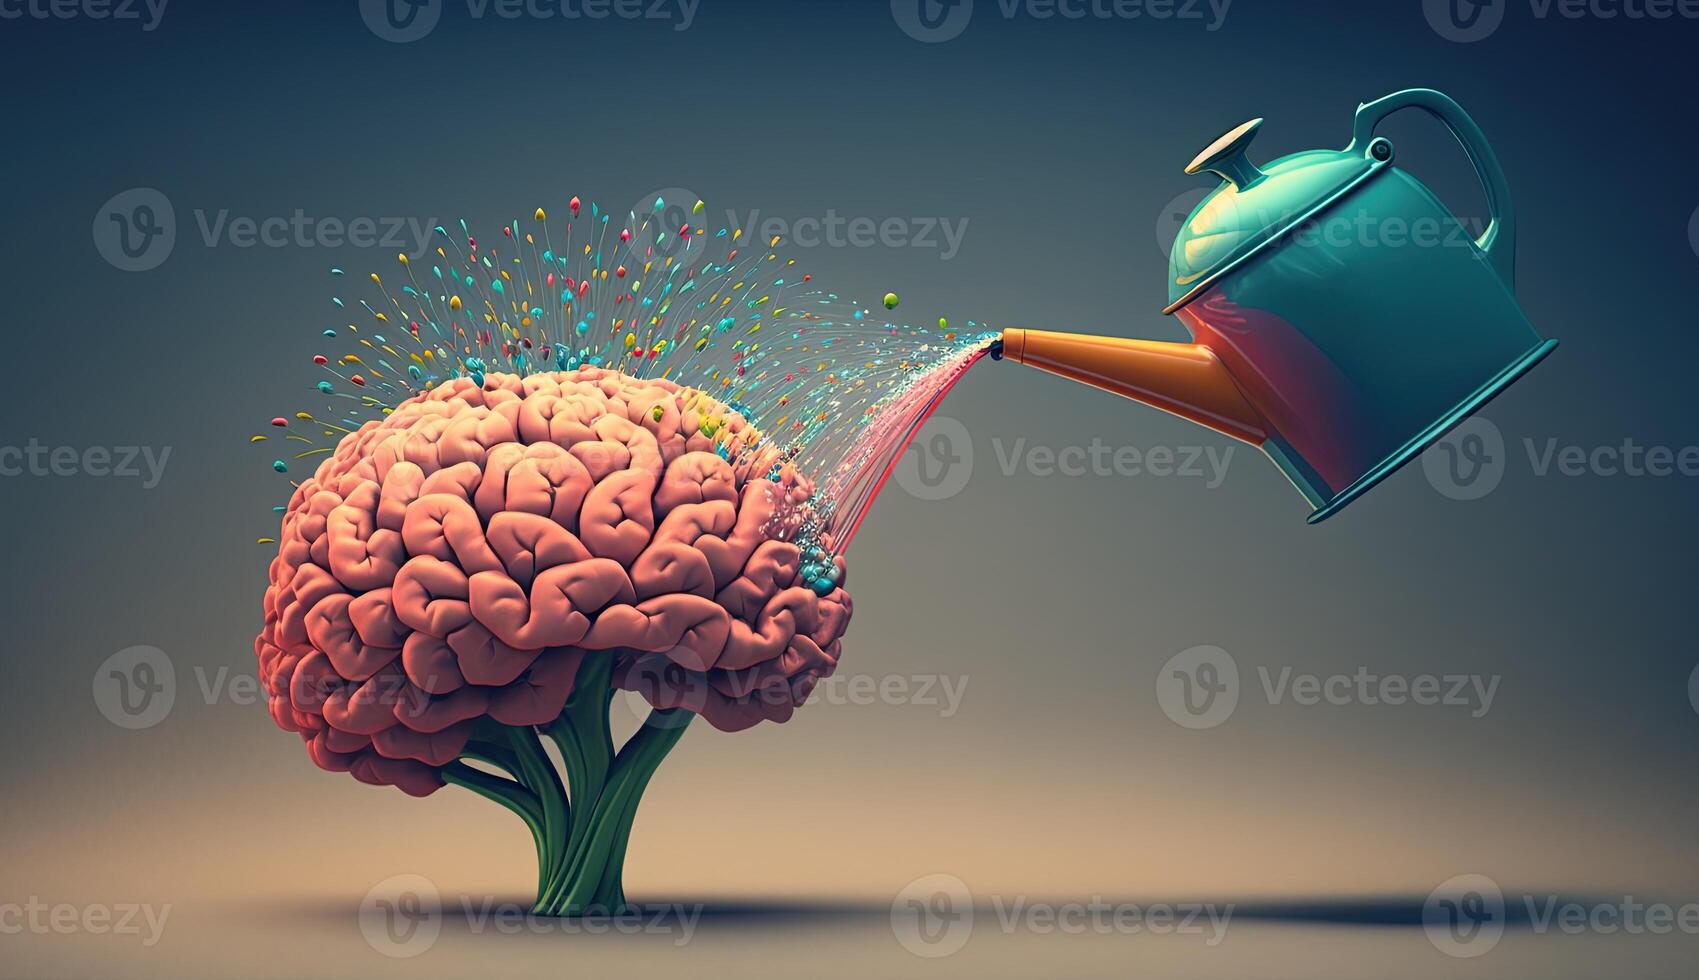 I was watering a human brain, the concept of creative thinking, brainstorming, and mental health illustration. photo